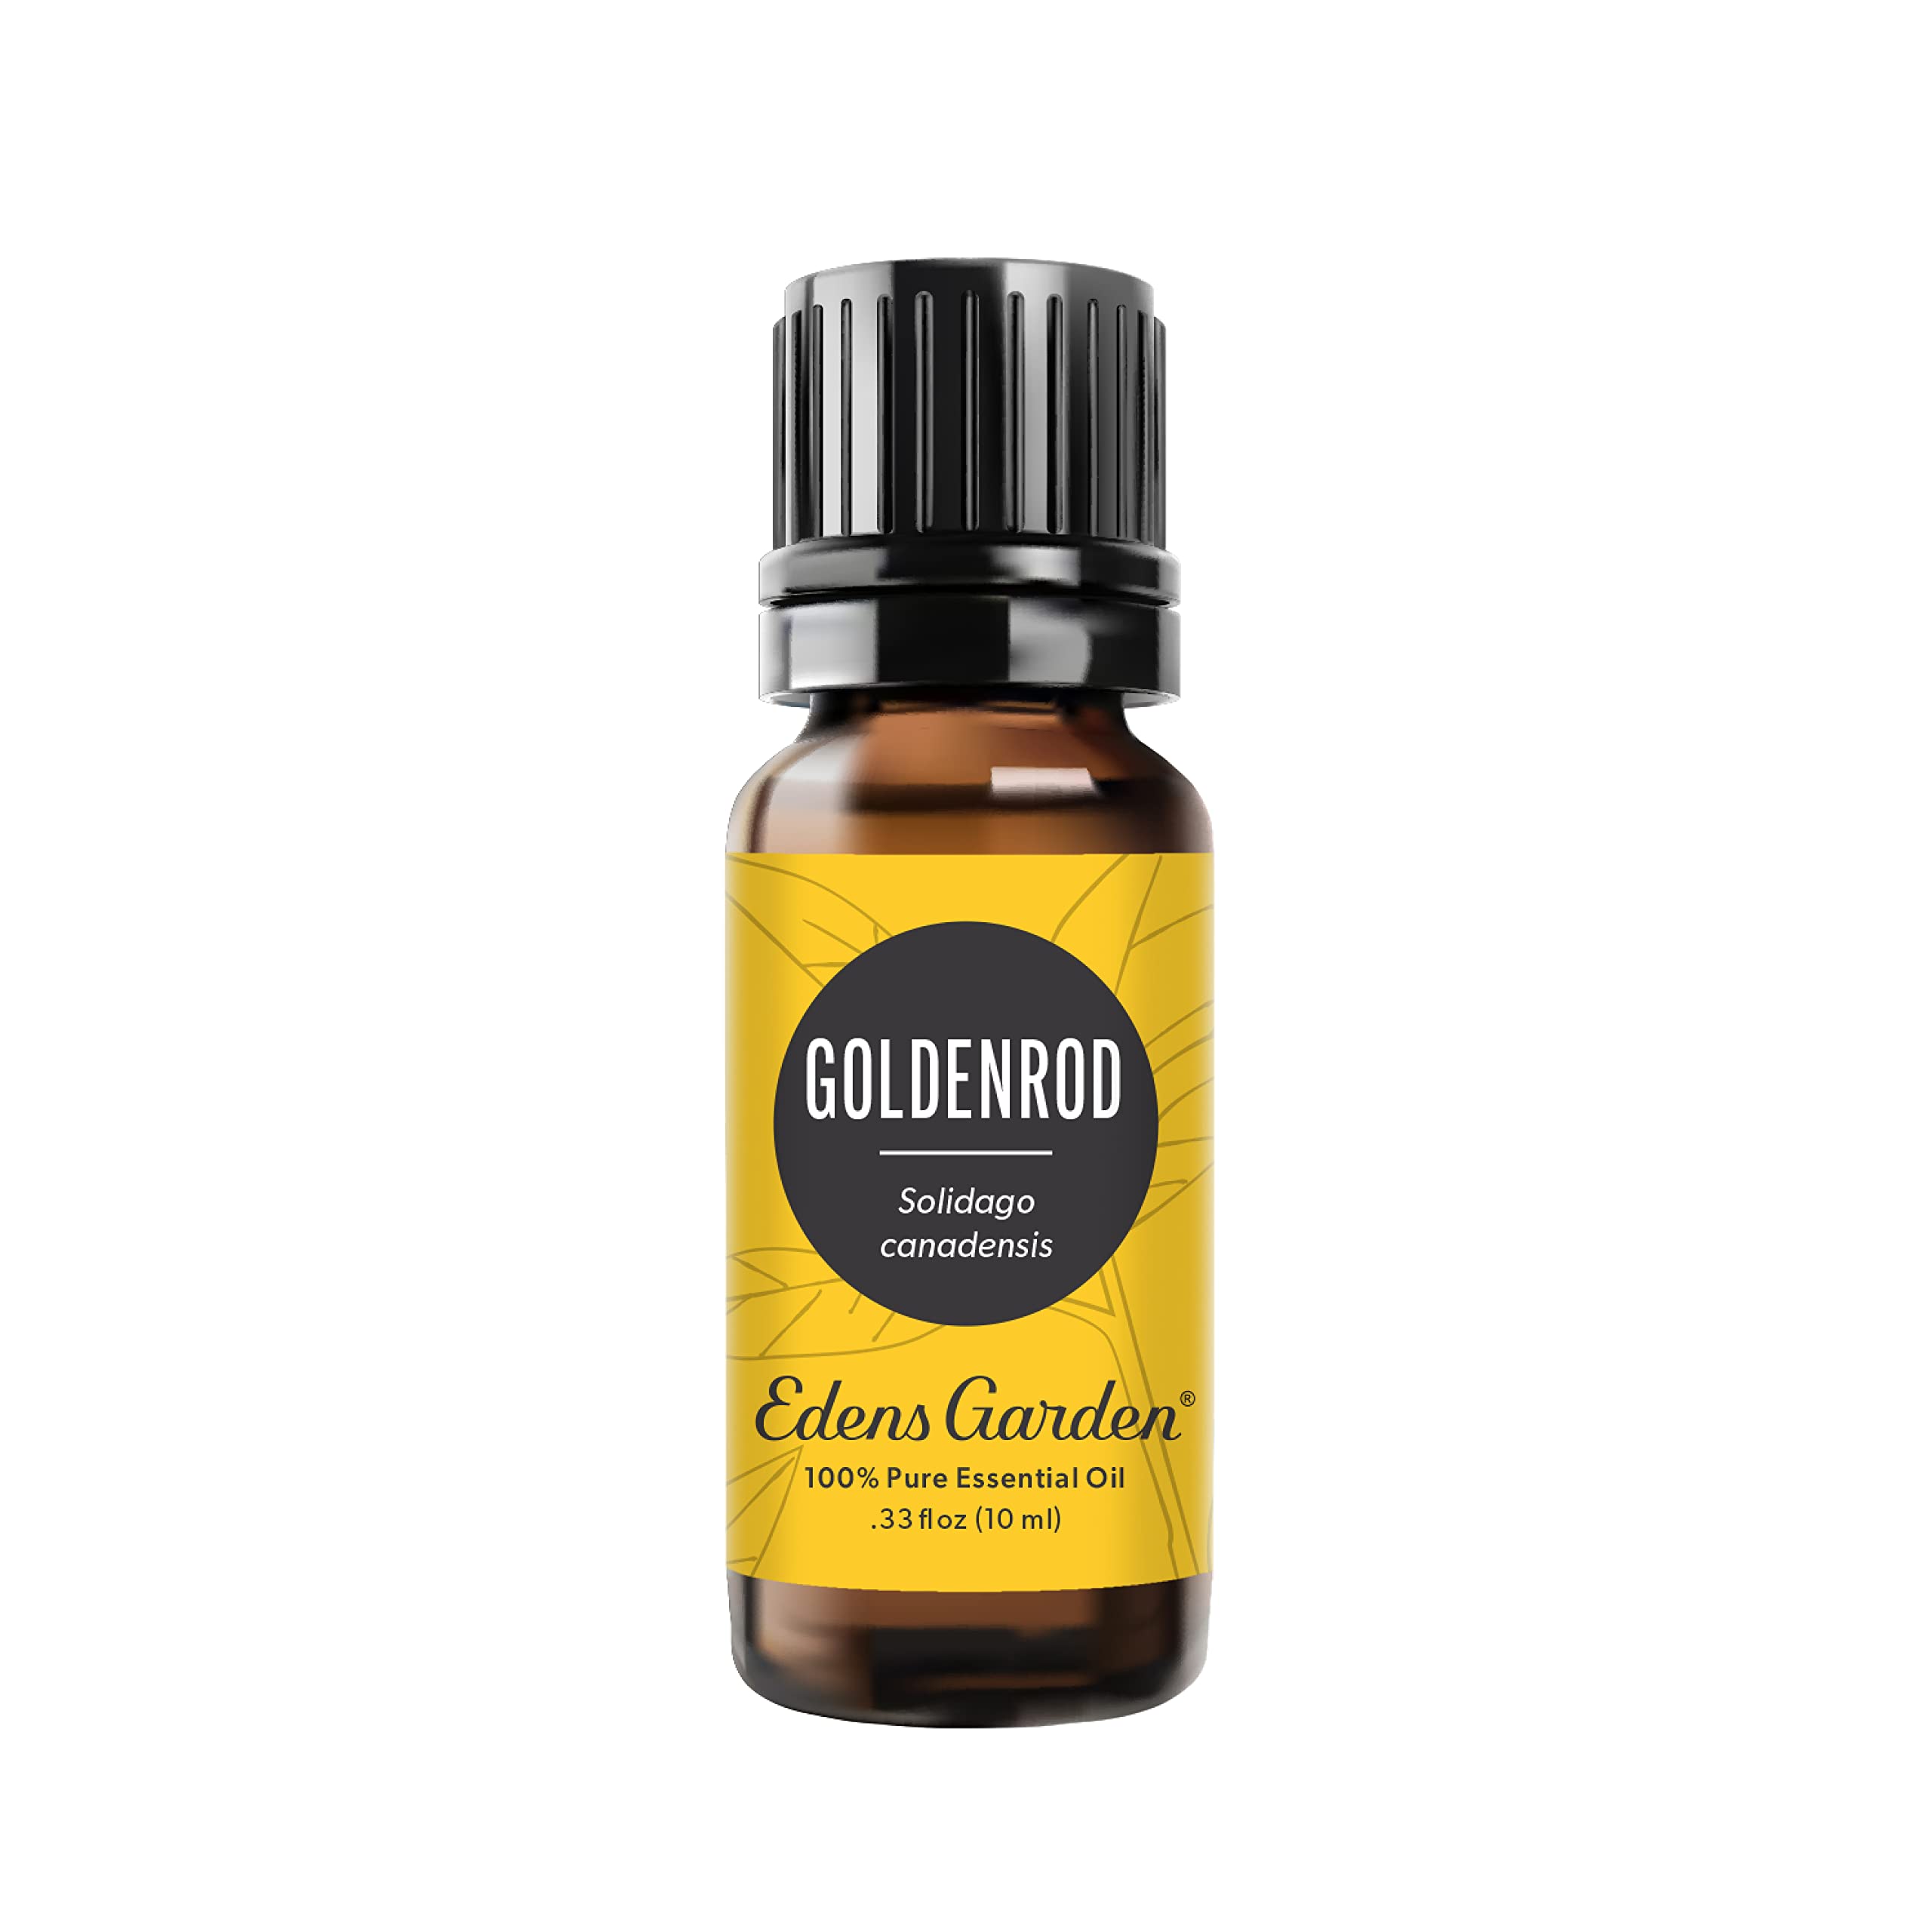 Edens Garden Goldenrod Essential Oil, 100% Pure Therapeutic Grade (Undiluted Natural/ Homeopathic Aromatherapy Scented Essential Oil Singles) 10 ml